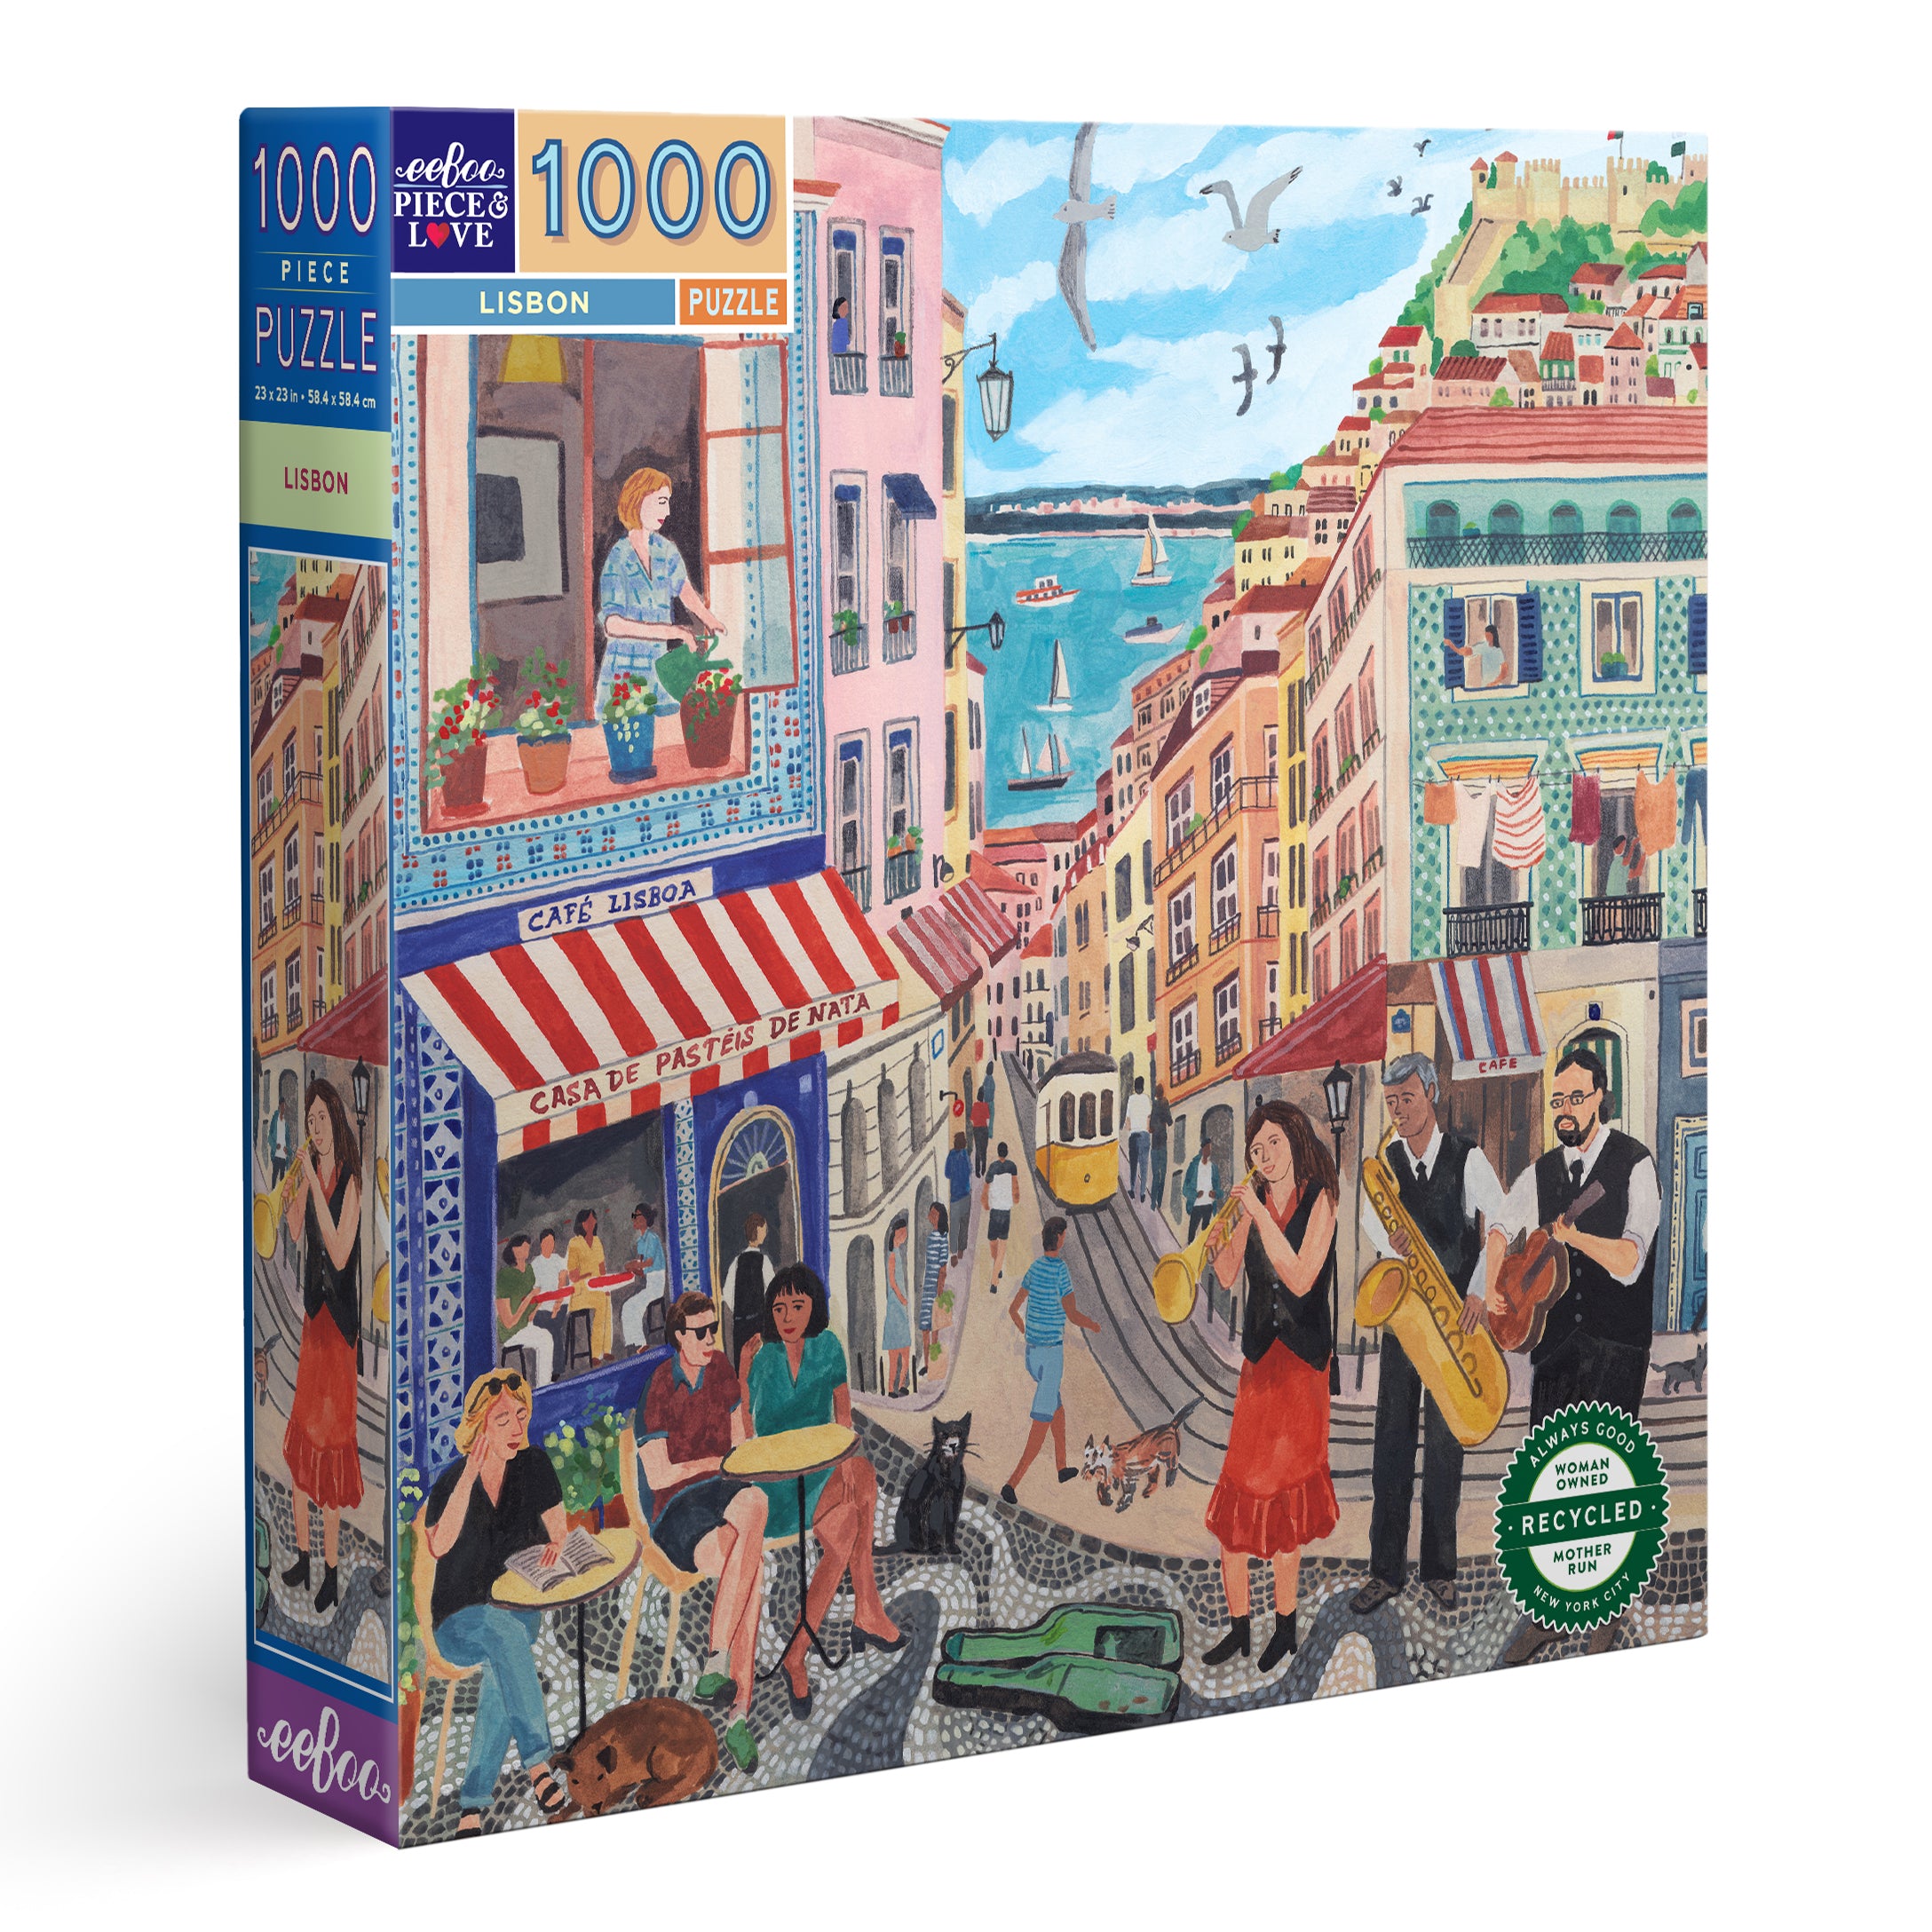 film middag Hoes Lisbon Portugal 1000 Piece Jigsaw Puzzle | eeBoo Piece & Love Gifts